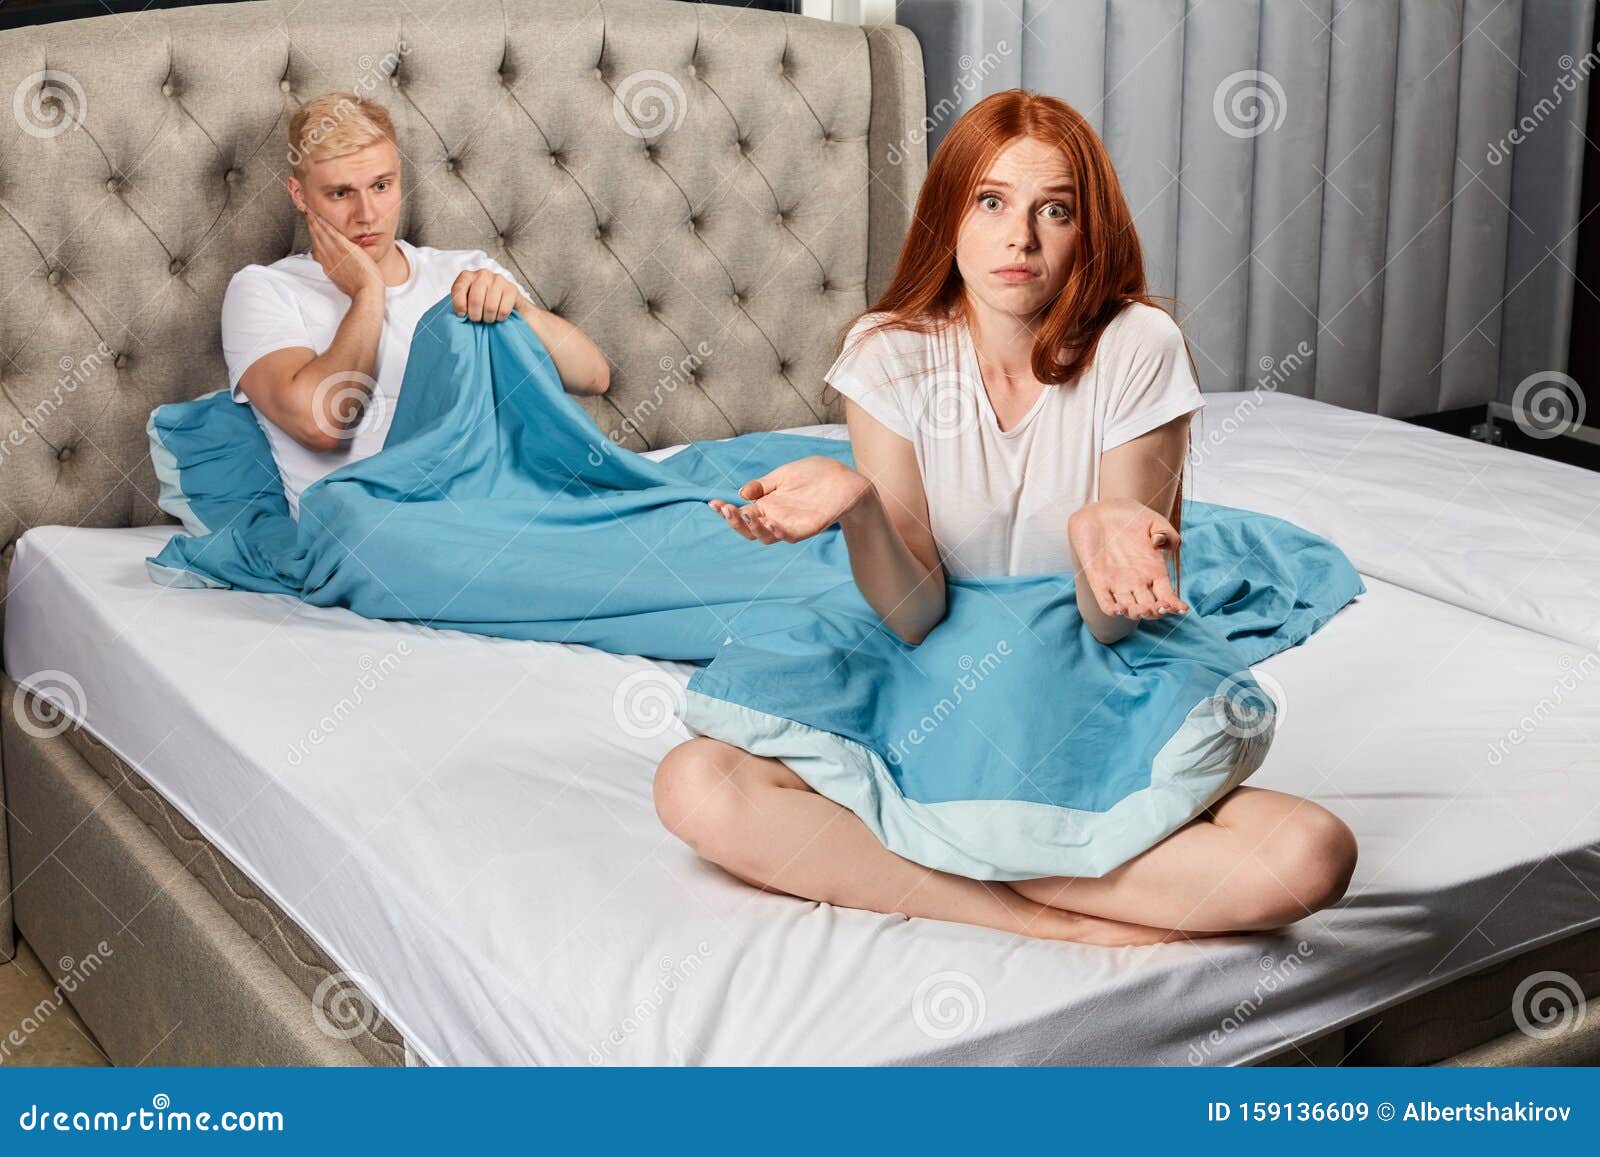 Puzzled Man and Woman Waiting for Reaction after Stimulant Cream Stock Image photo photo